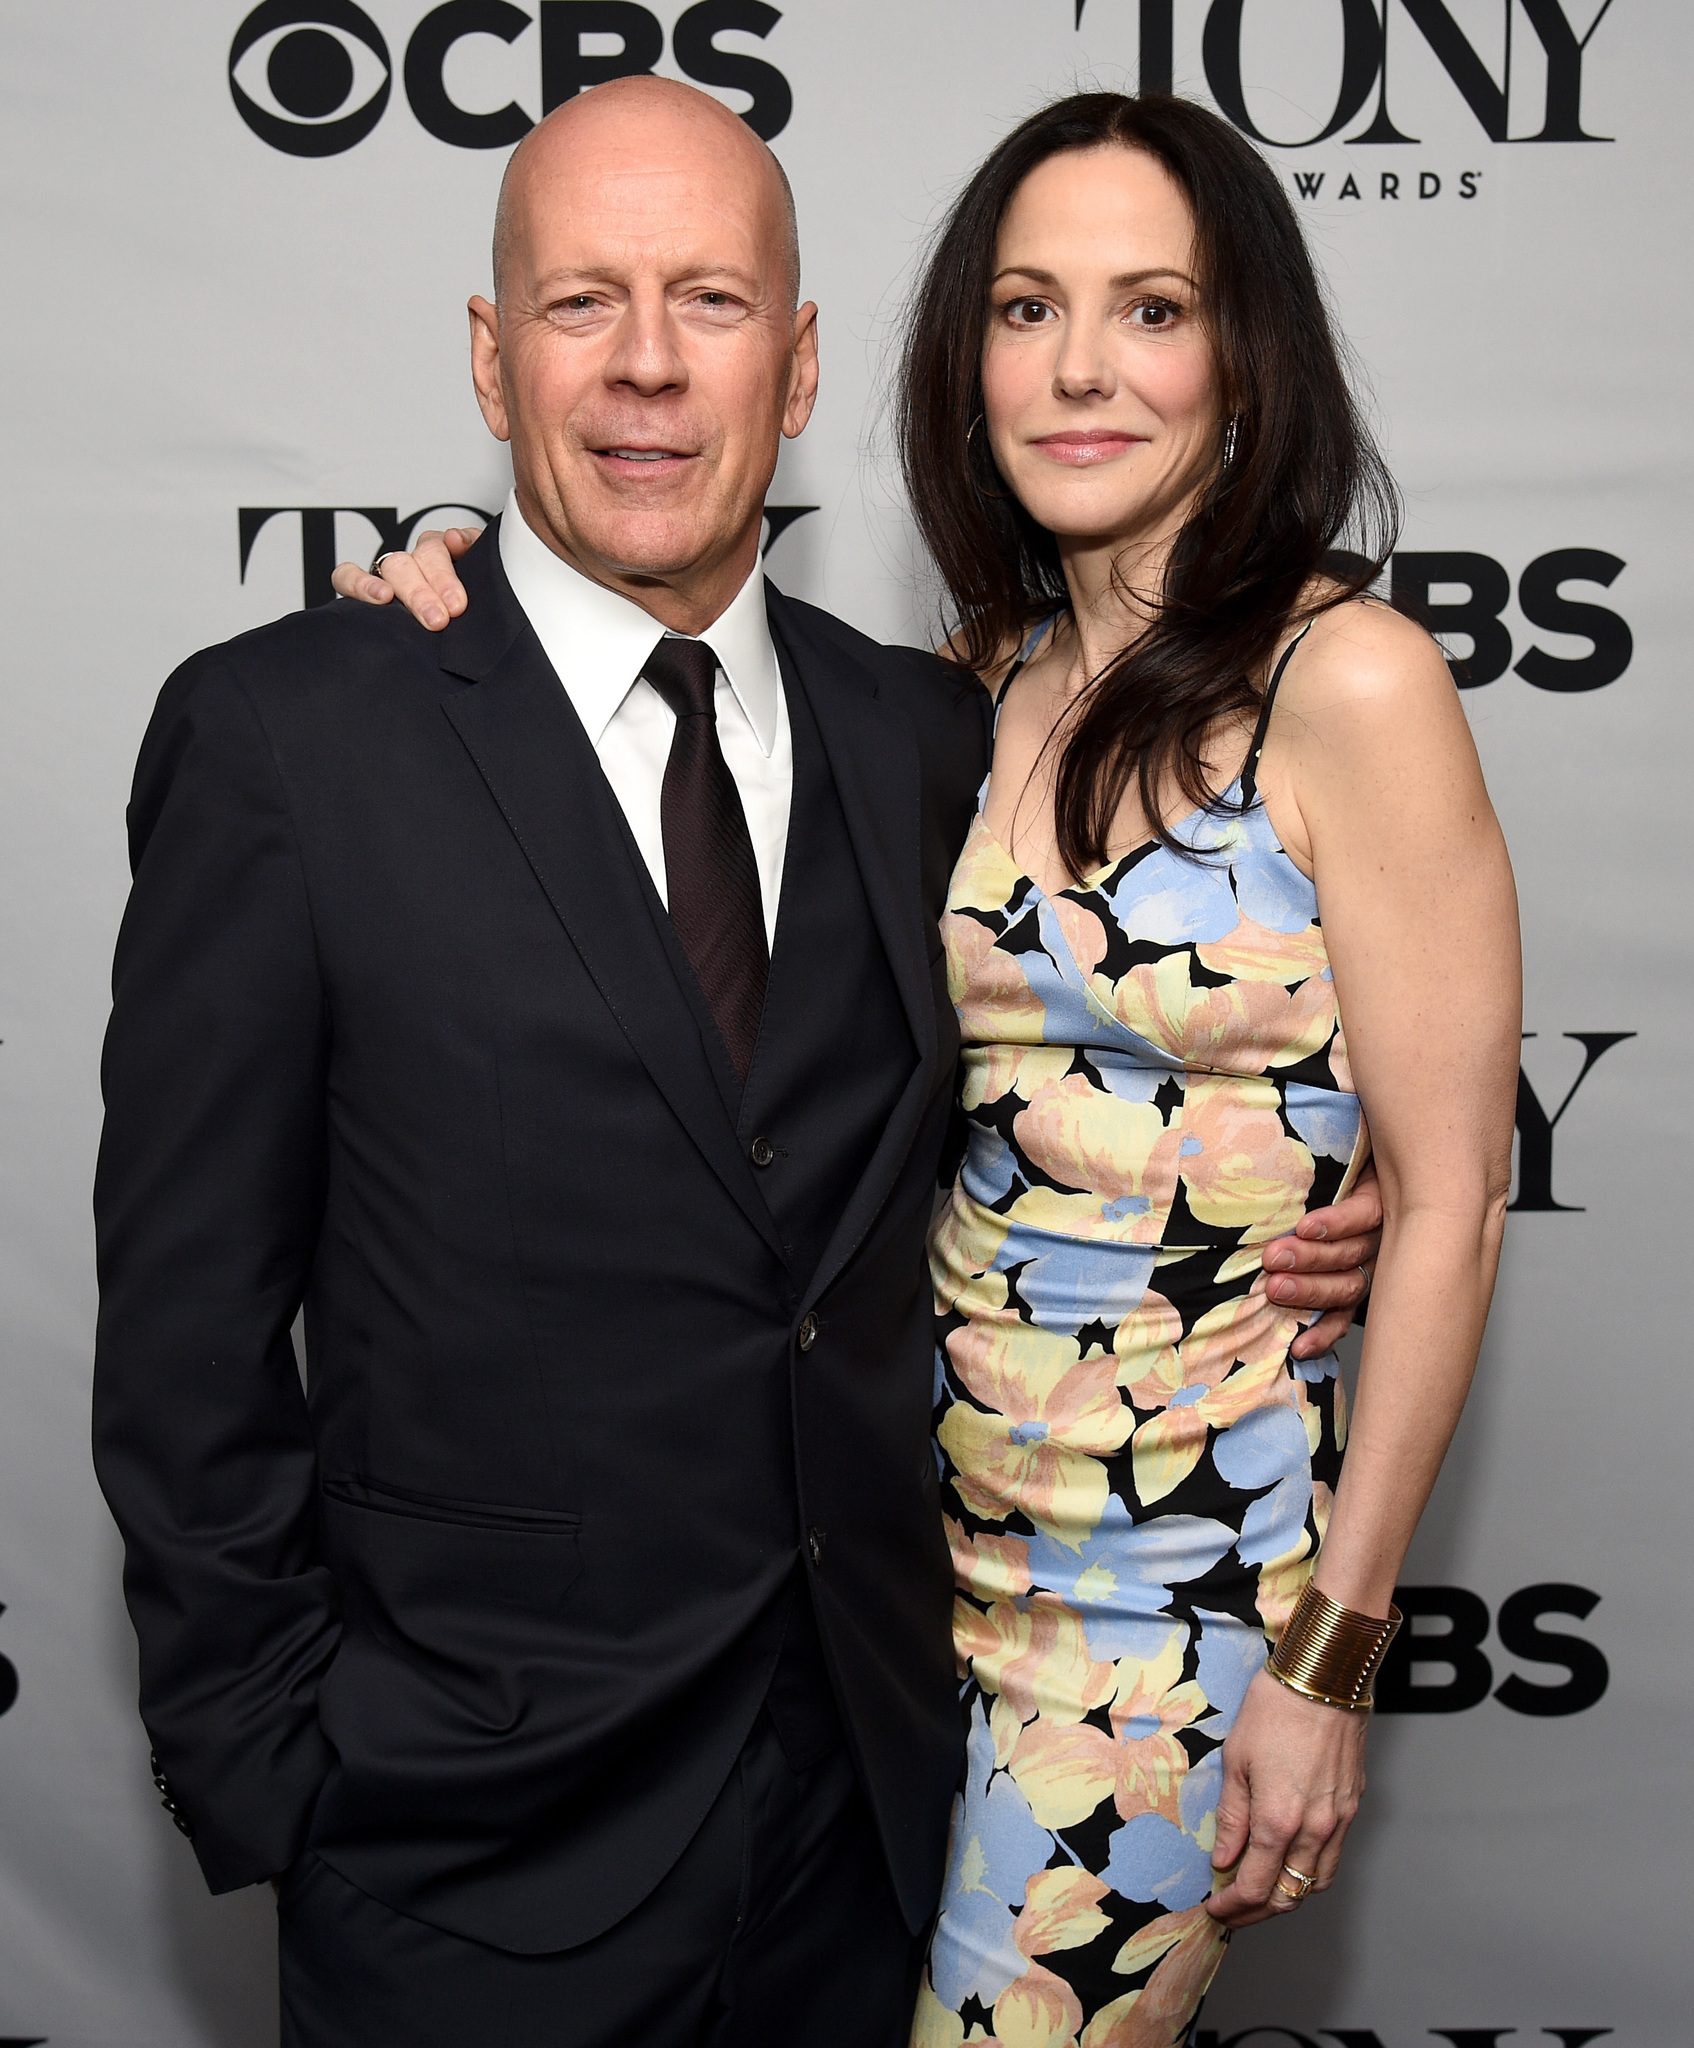 Bruce Willis and Mary-Louise Parker